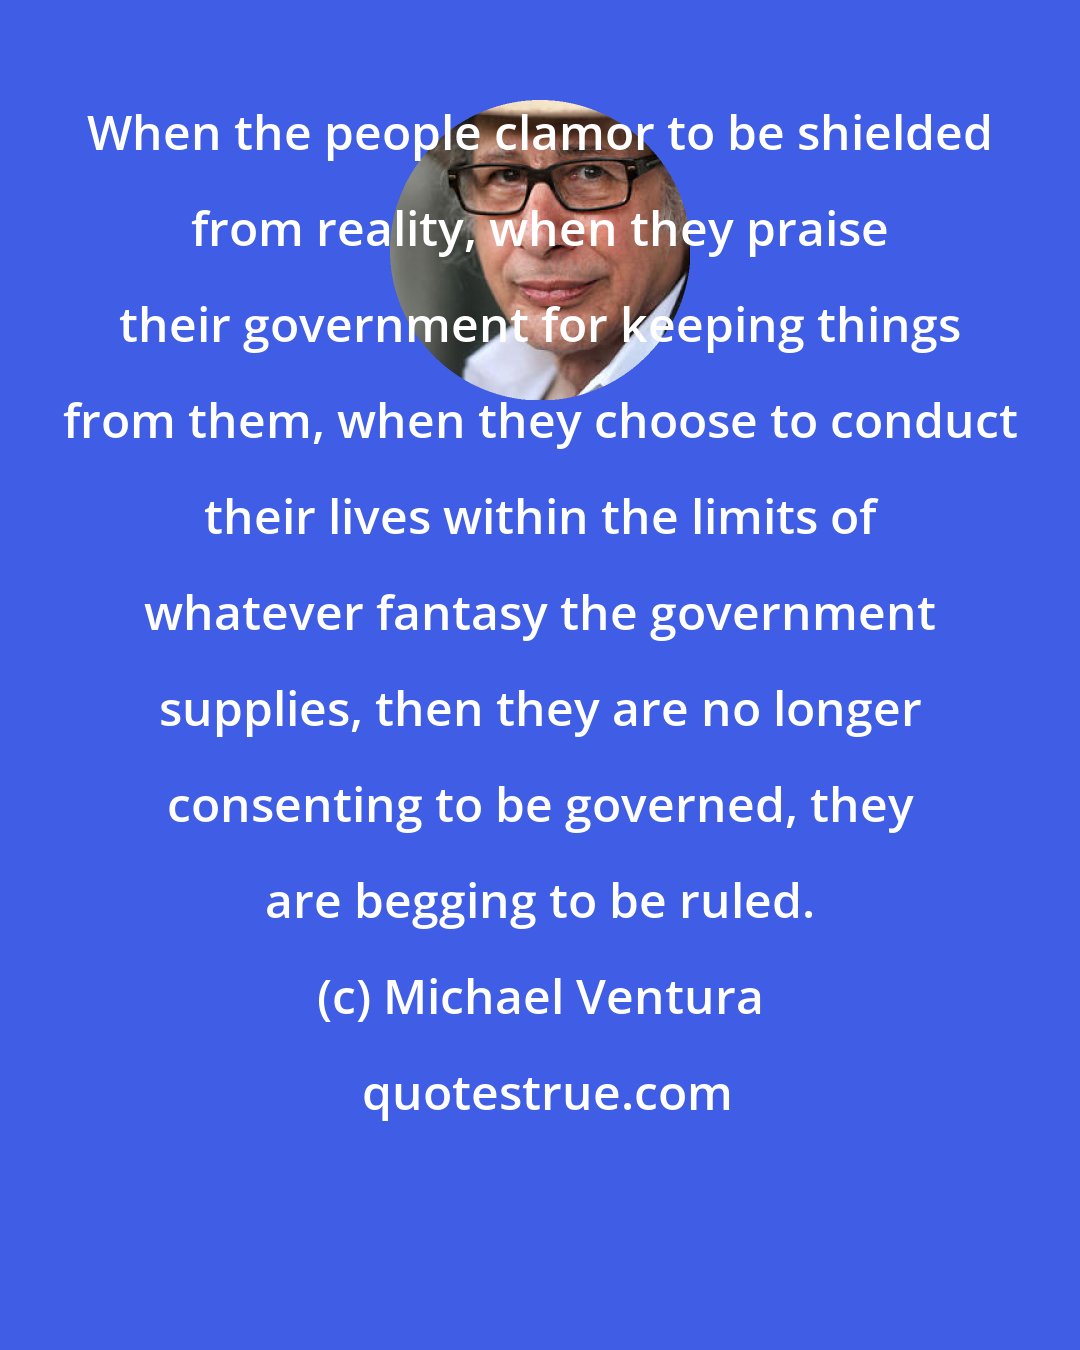 Michael Ventura: When the people clamor to be shielded from reality, when they praise their government for keeping things from them, when they choose to conduct their lives within the limits of whatever fantasy the government supplies, then they are no longer consenting to be governed, they are begging to be ruled.